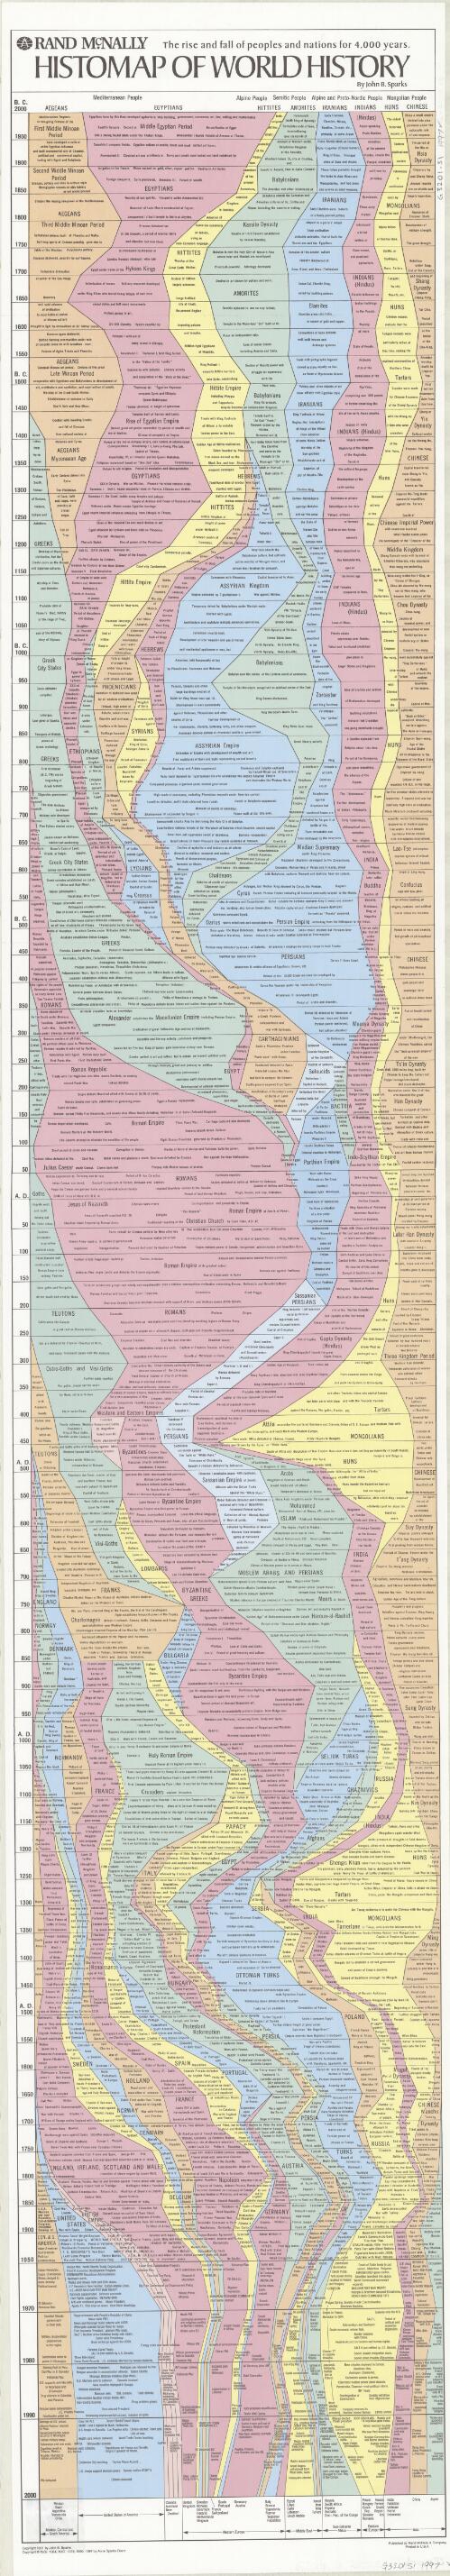 Histomap of world history [chart] : the rise and fall of peoples and nations for 4,000 years / by John B. Sparks